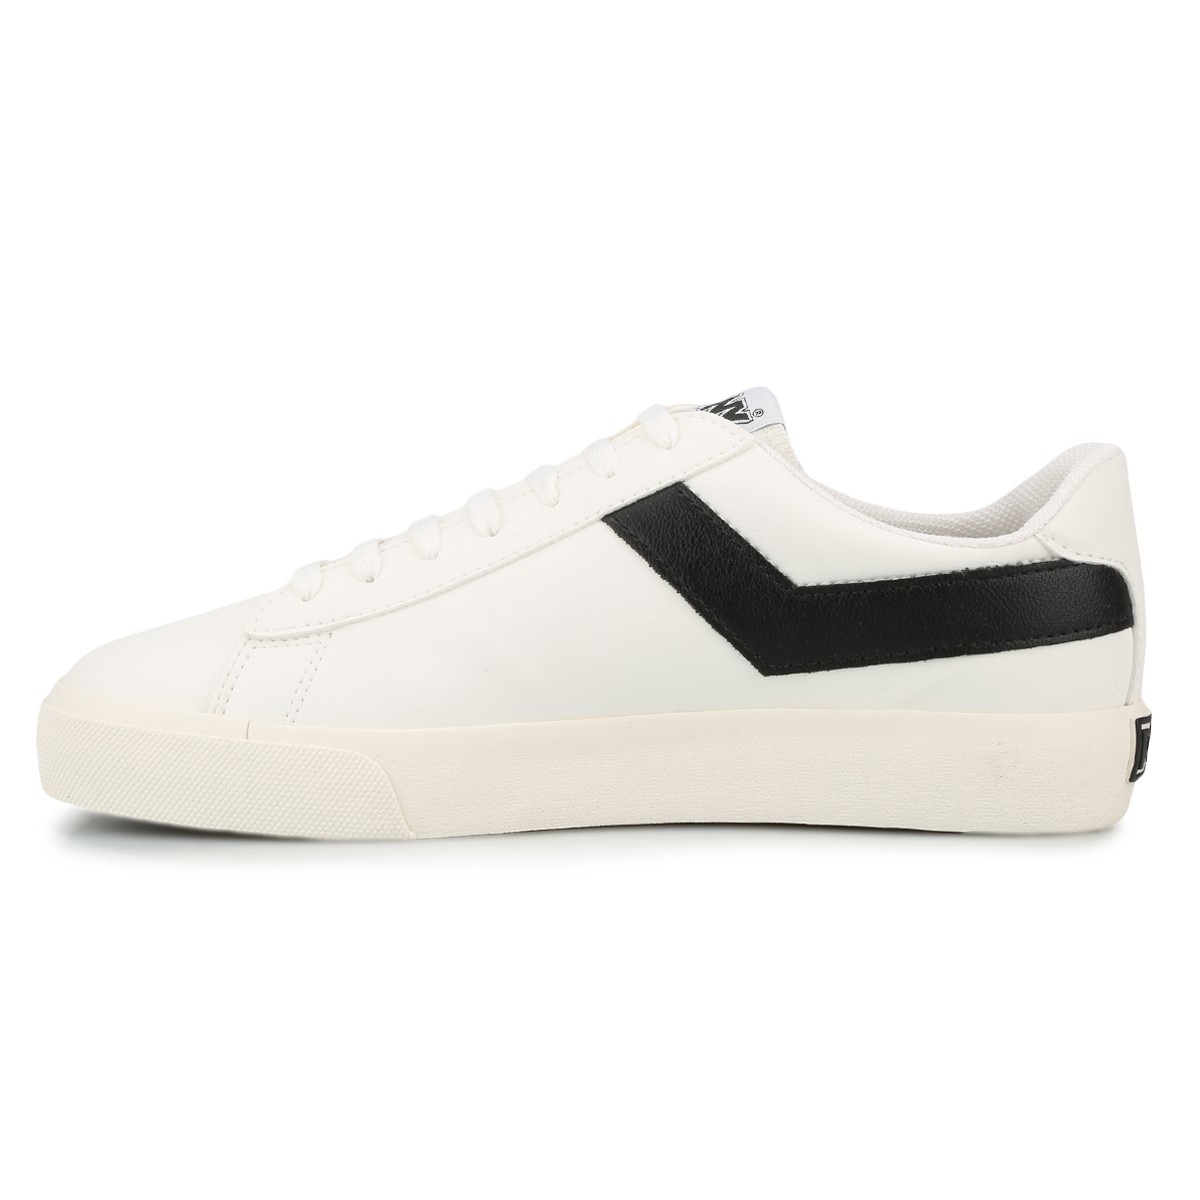 Zapatillas Pony Topstar Ox New Pele,  image number null